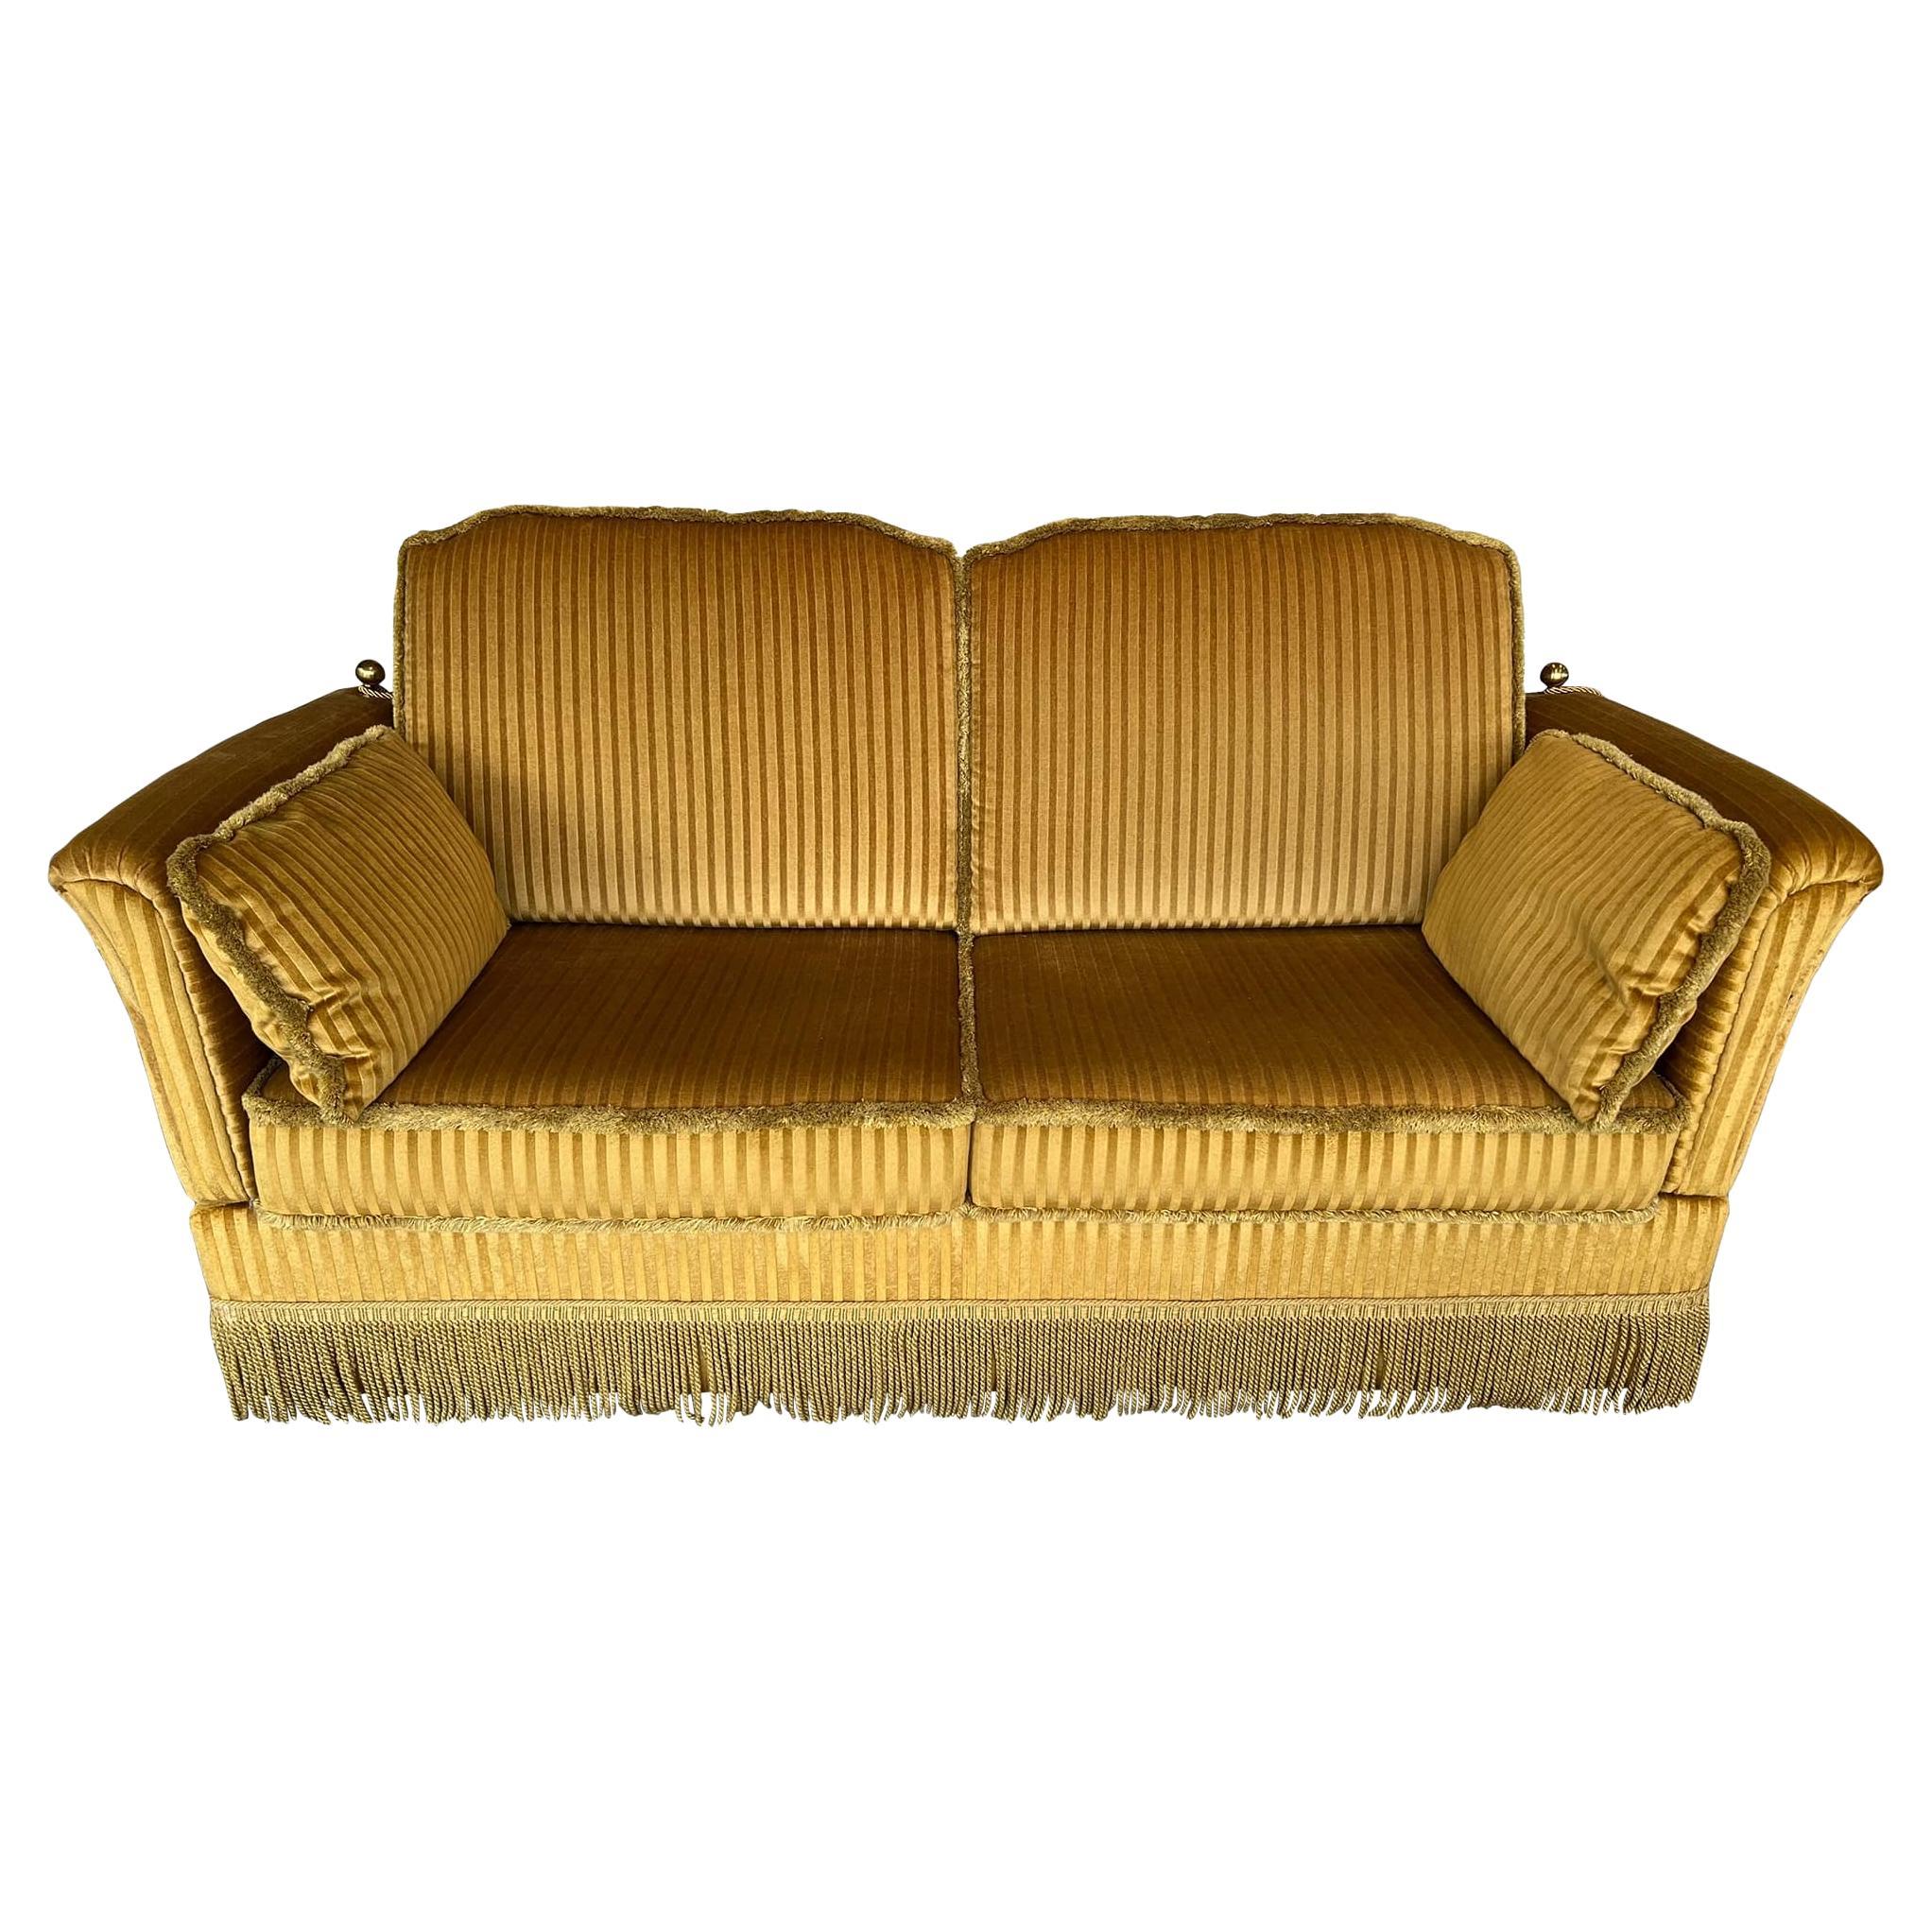 Vintage Art Deco Styled Adjustable Sofa Bed With Cushions and Fringes For Sale